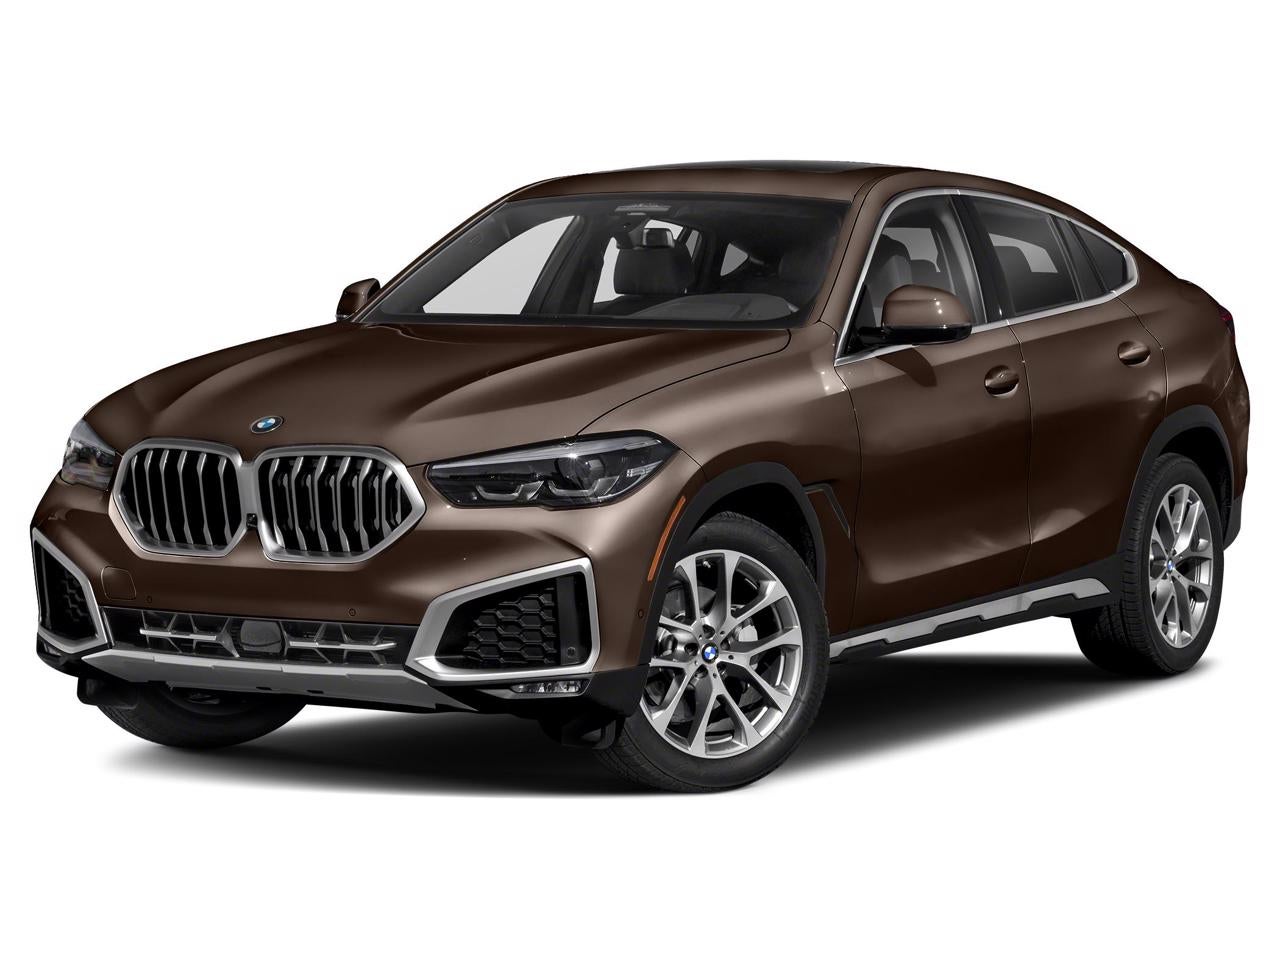 The X6